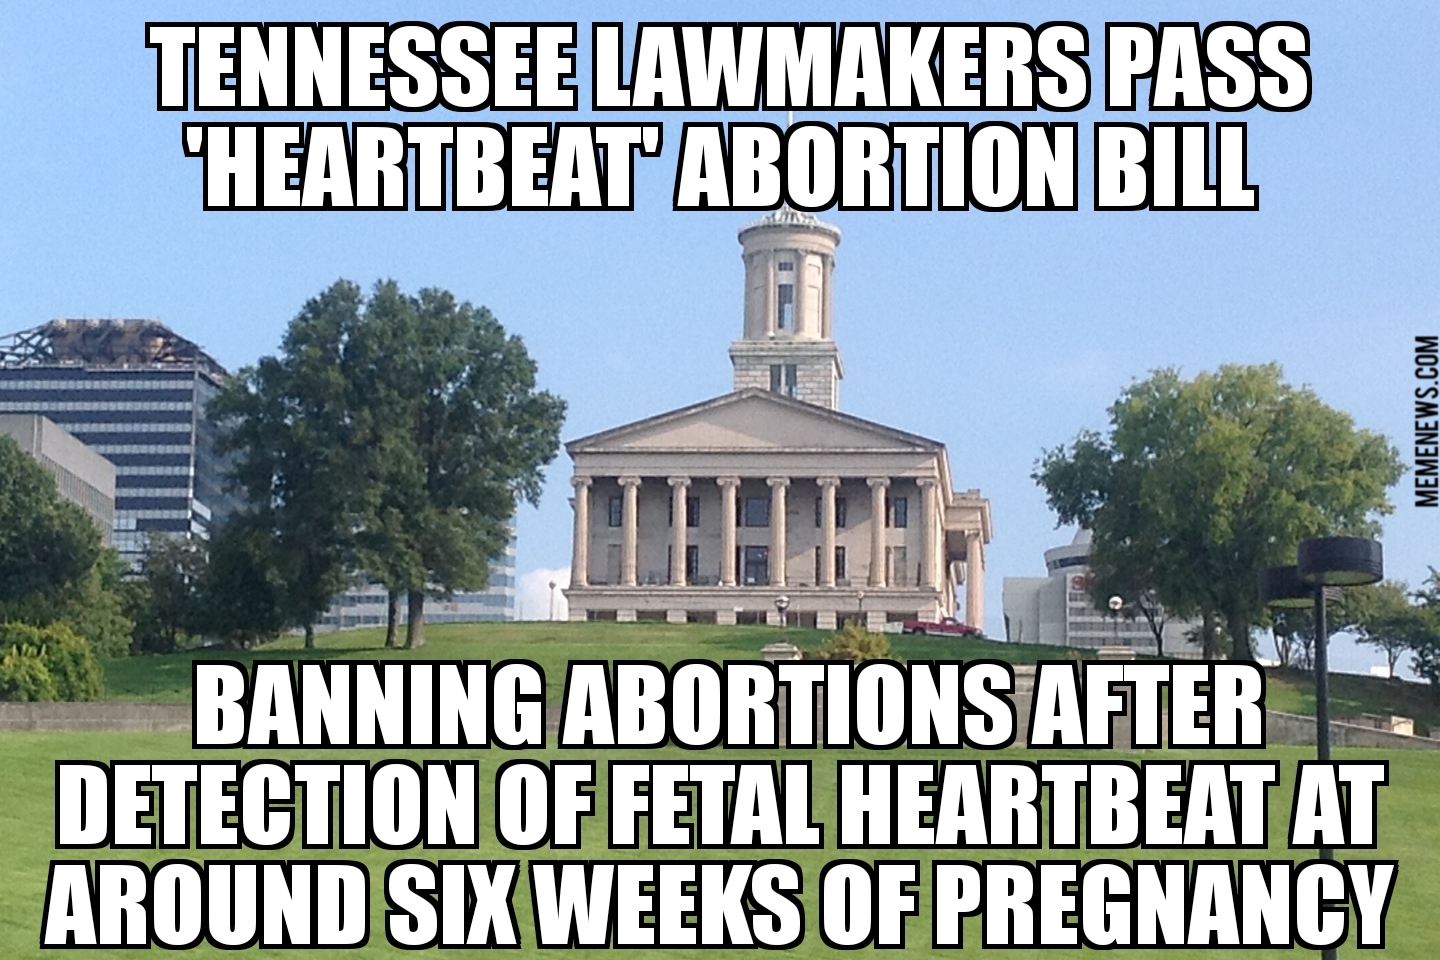 Tennessee lawmakers pass ‘heartbeat’ abortion bill